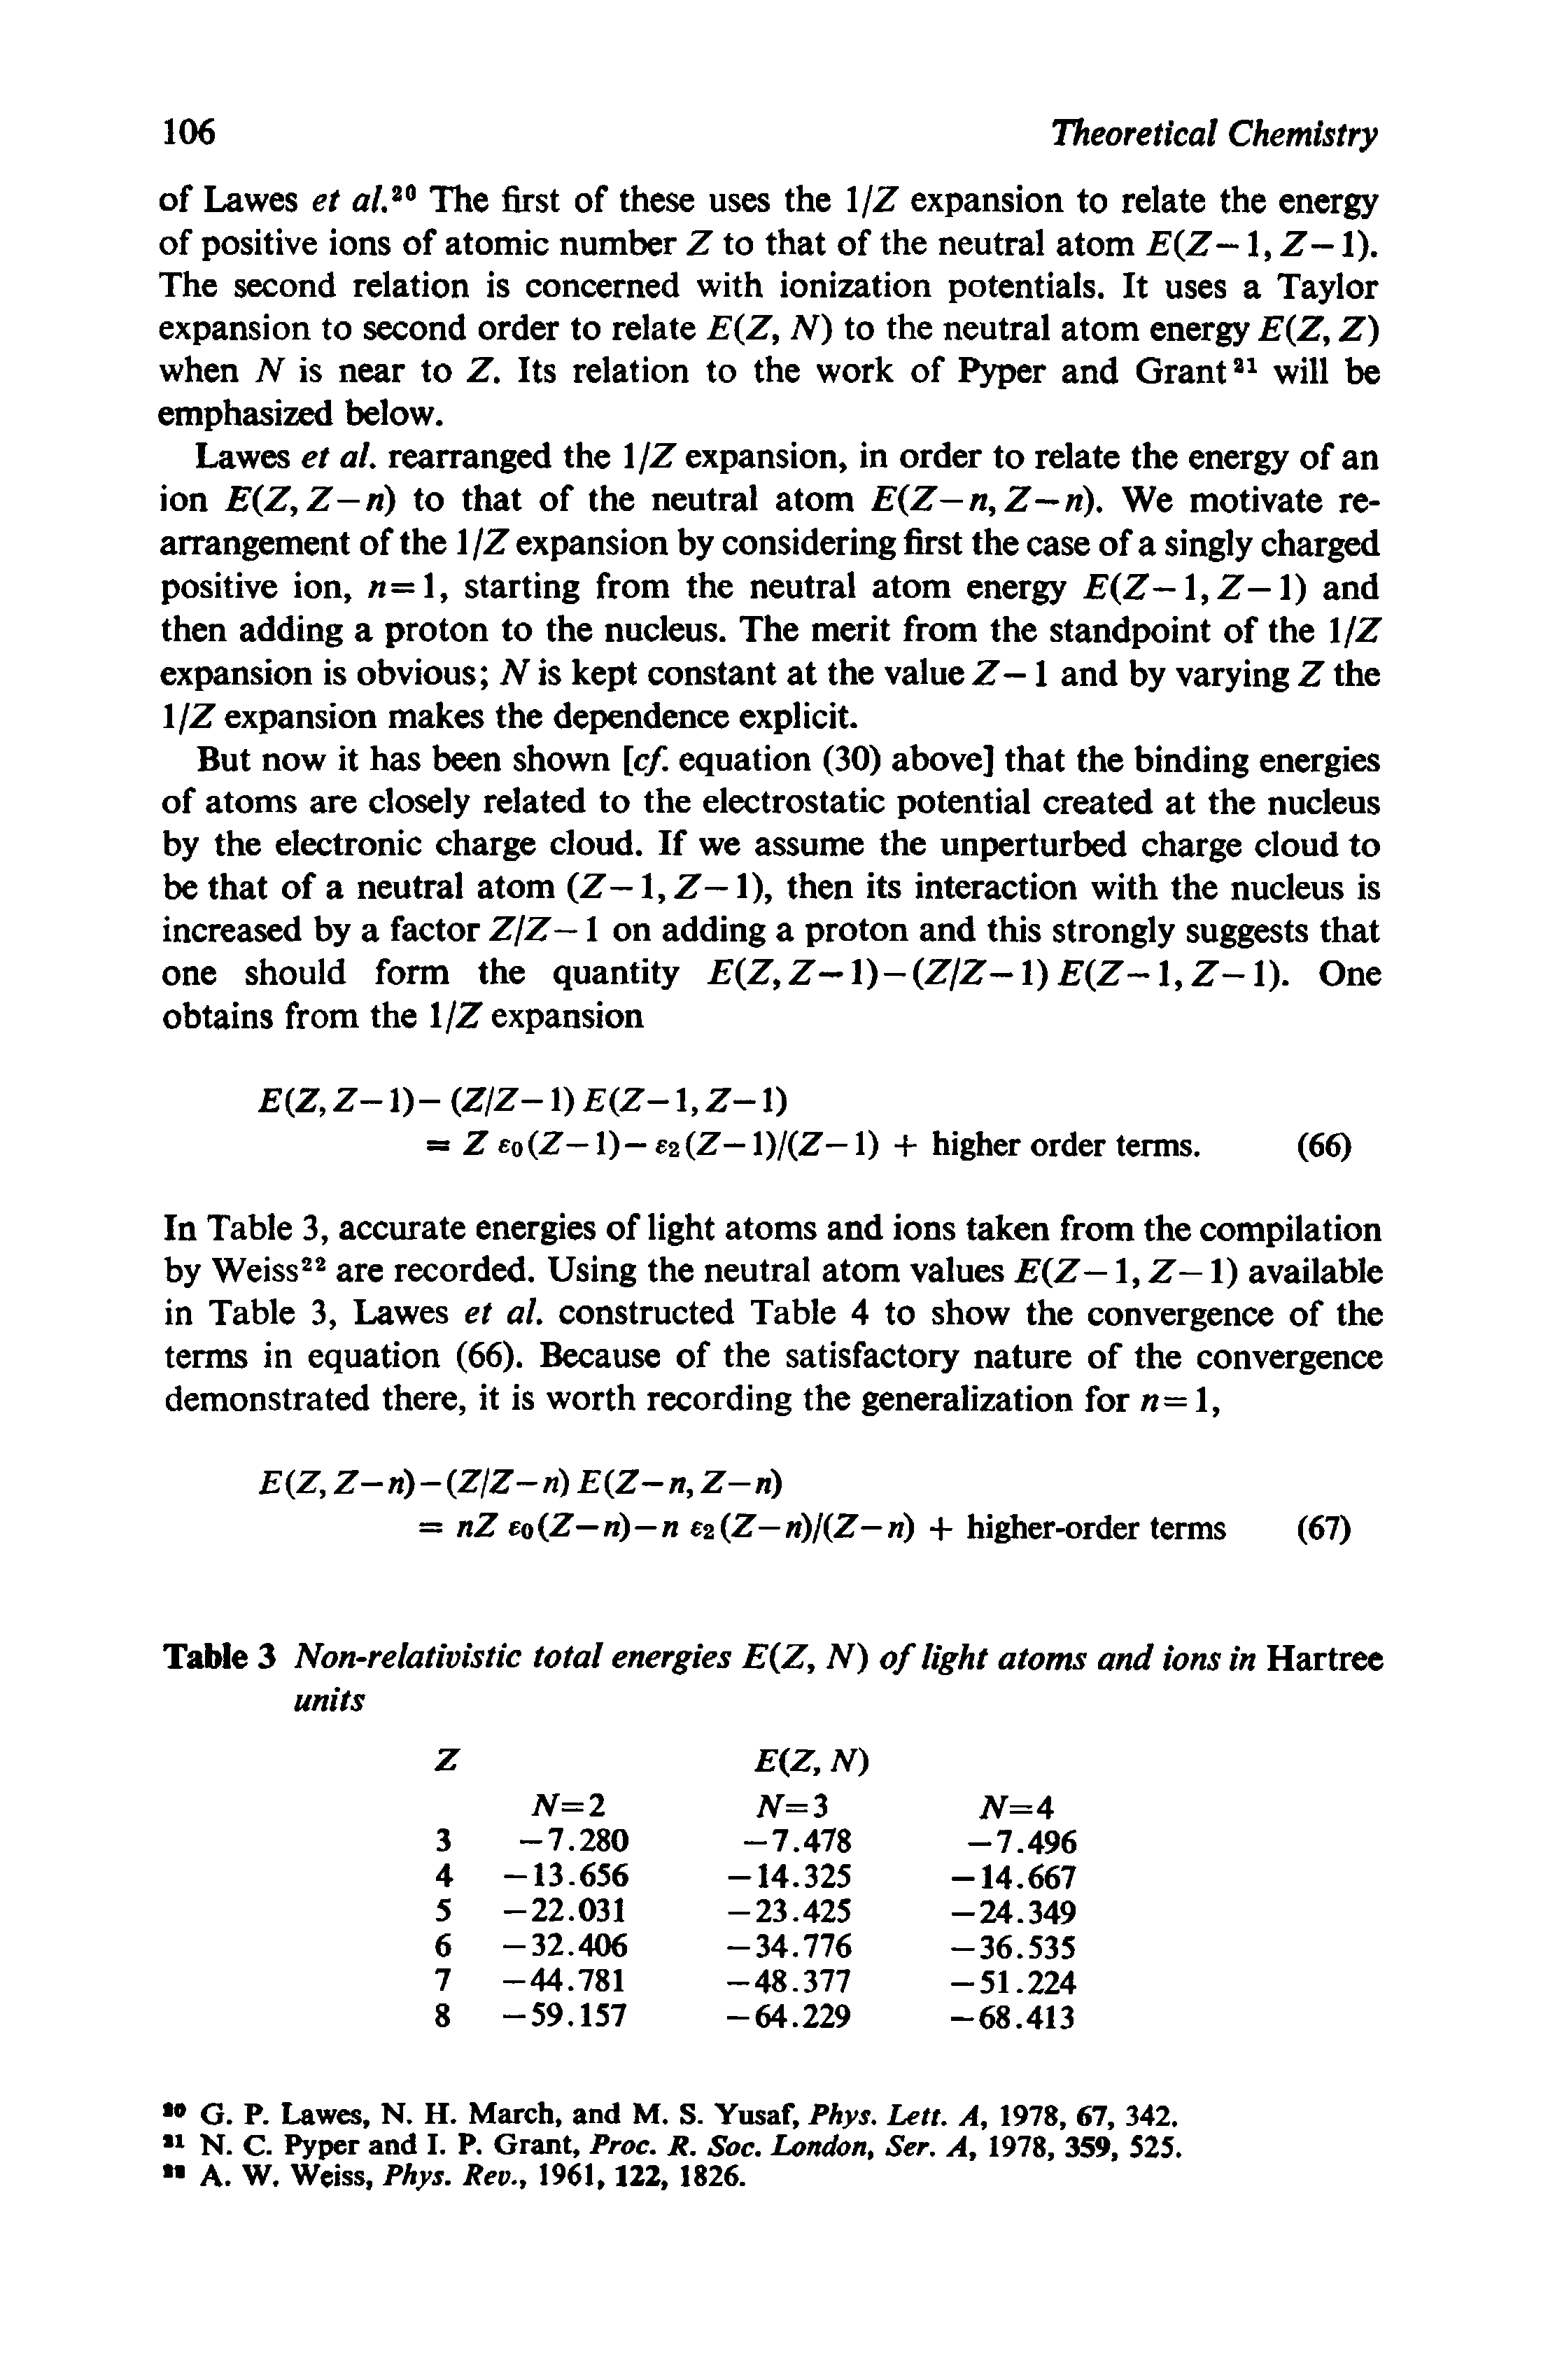 Table 3 Non-relativistic total energies E(Z, N) of light atoms and ions in Hartree units...